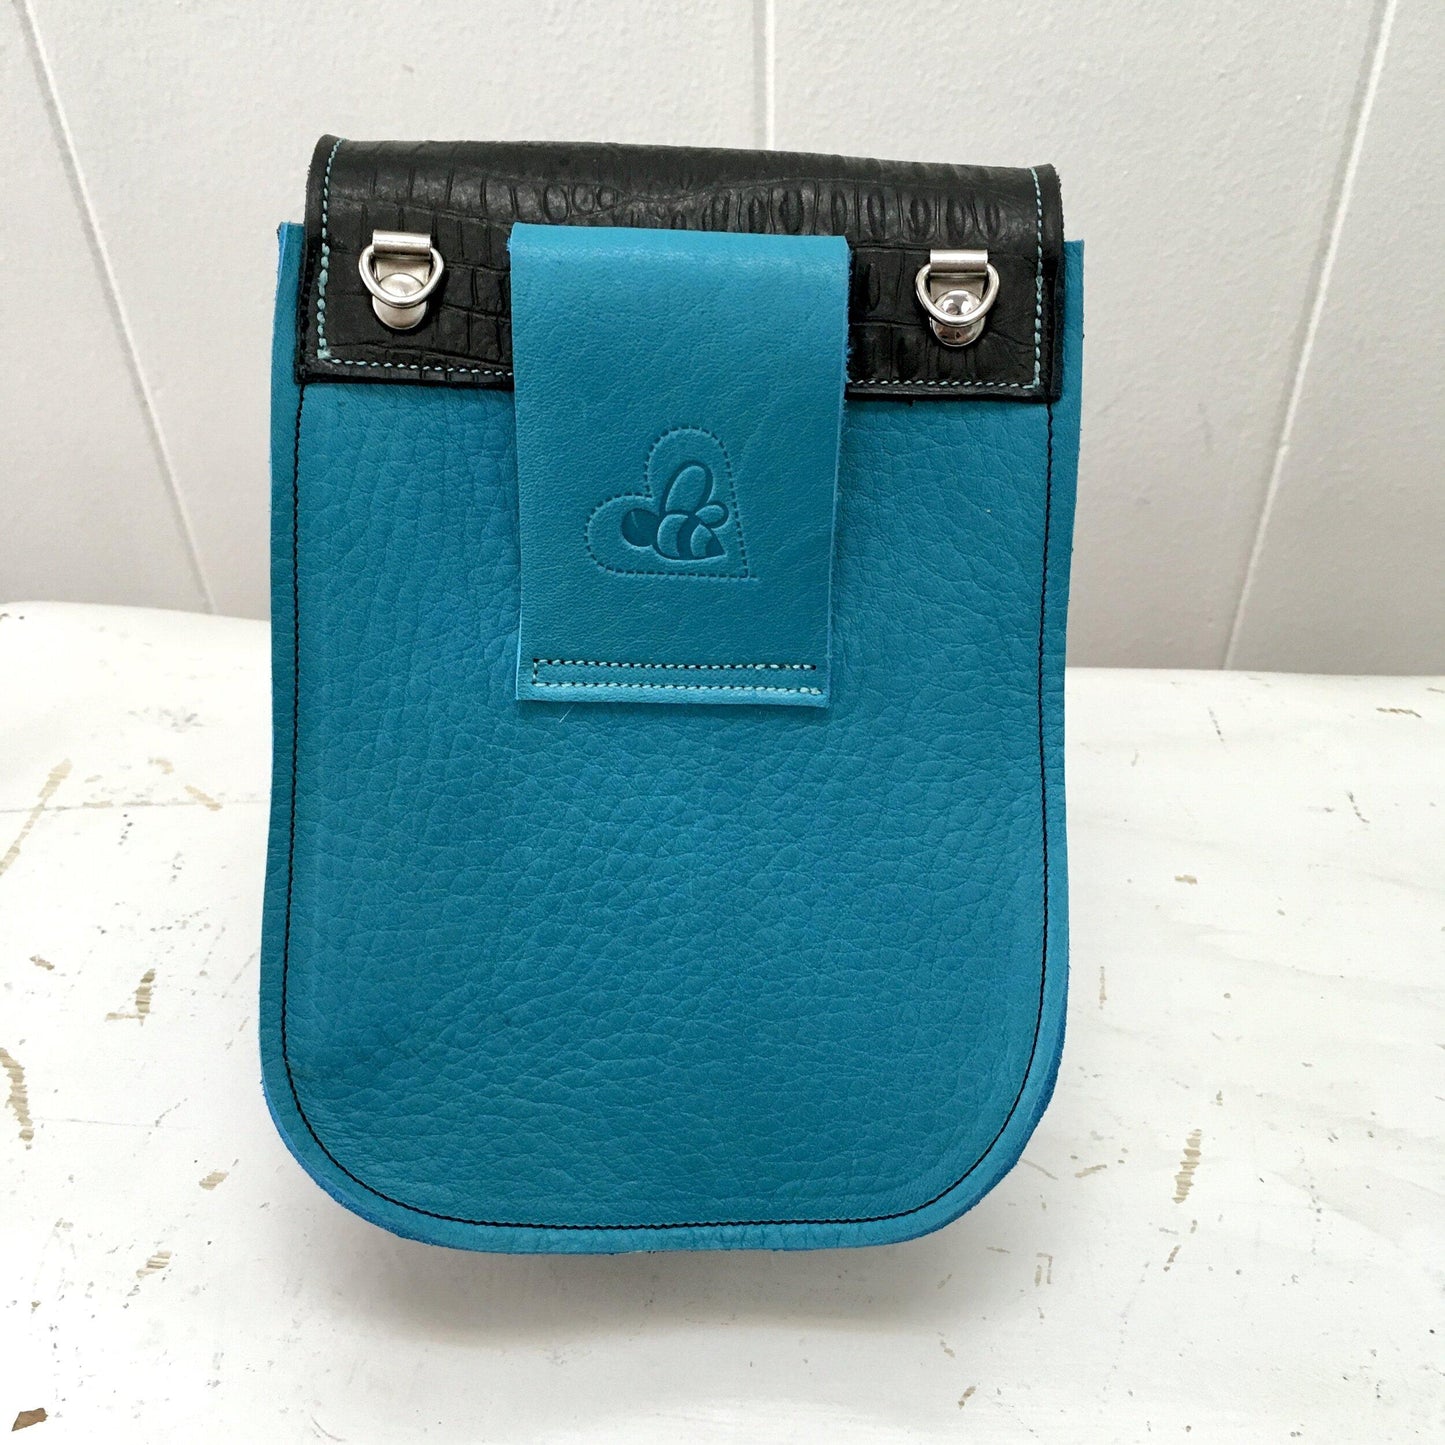 Essentials convertible bag Turquoise with Black flap and side gusset